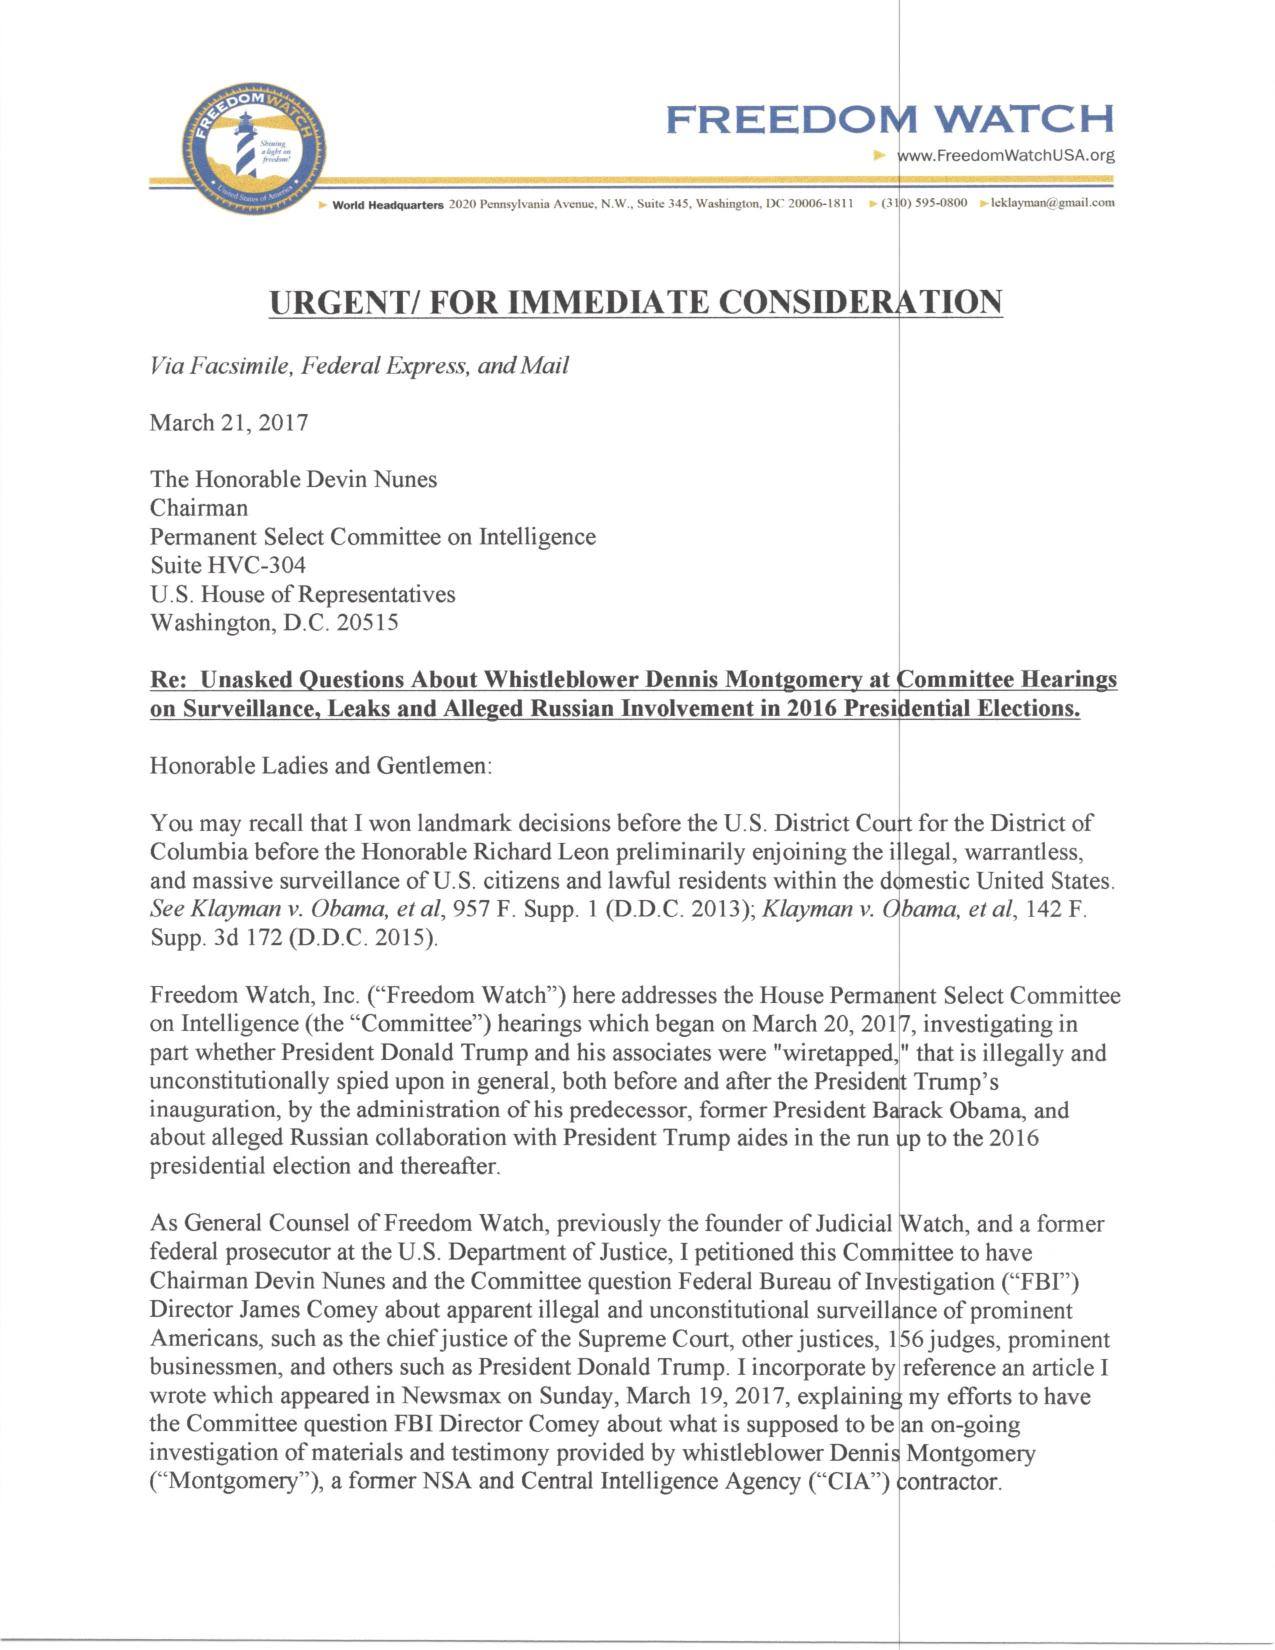 Devin Nunes received this letter yesterday .. Today he...